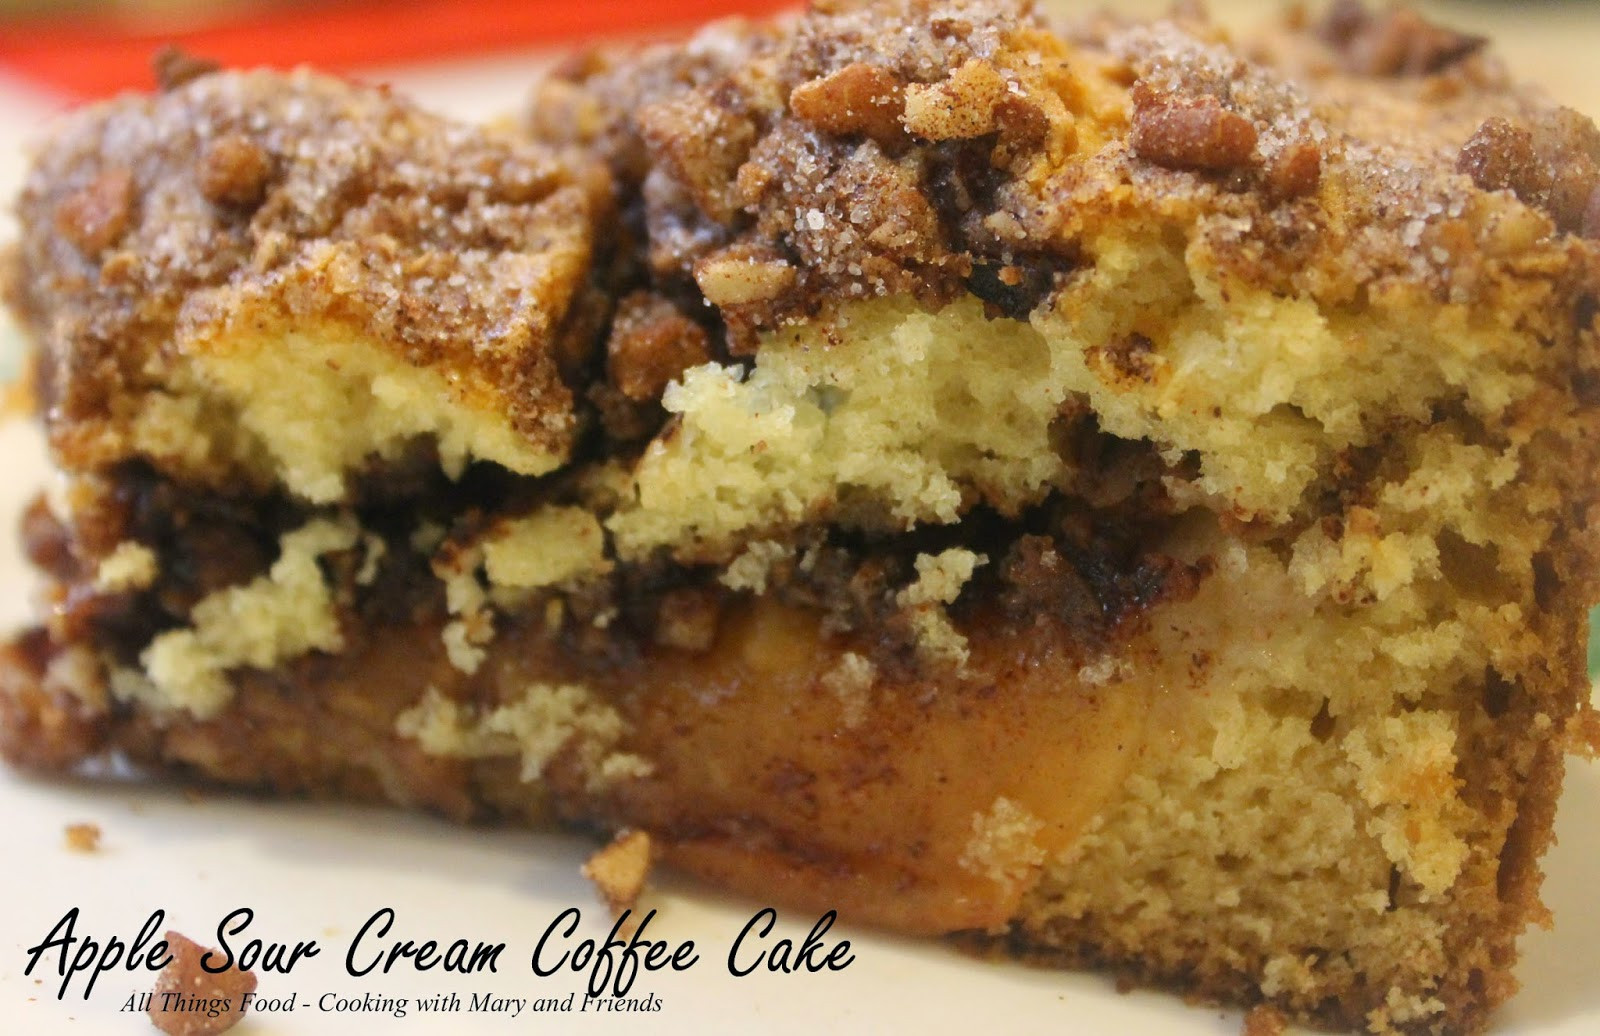 Apple Sour Cream Coffee Cake
 Cooking With Mary and Friends Apple Sour Cream Coffee Cake